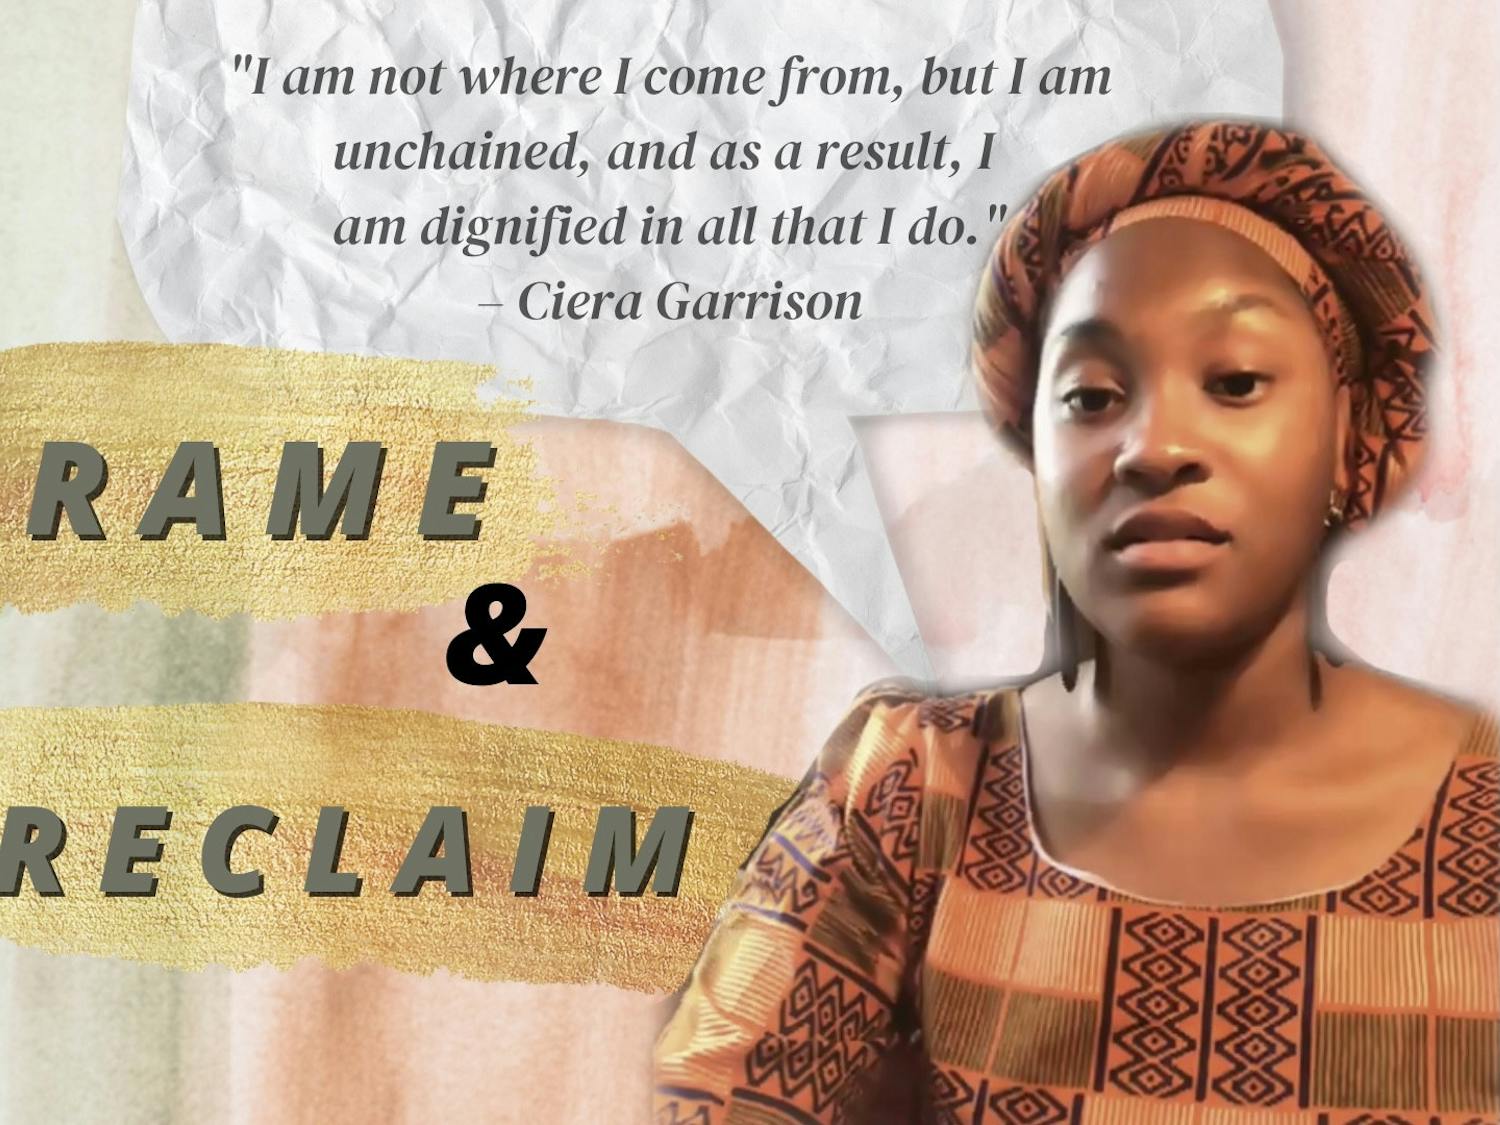 Ciera Garrison, a 23-year-old fourth-year sociology major at UF, was a guest speaker at the virtual &quot;Reframe and Reclaim&quot; event Wednesday. She read her piece &quot;Unchained&quot; at the event, which represents the art of being free from “past trauma,” “toxic exposure” and “mental bondage.&quot;